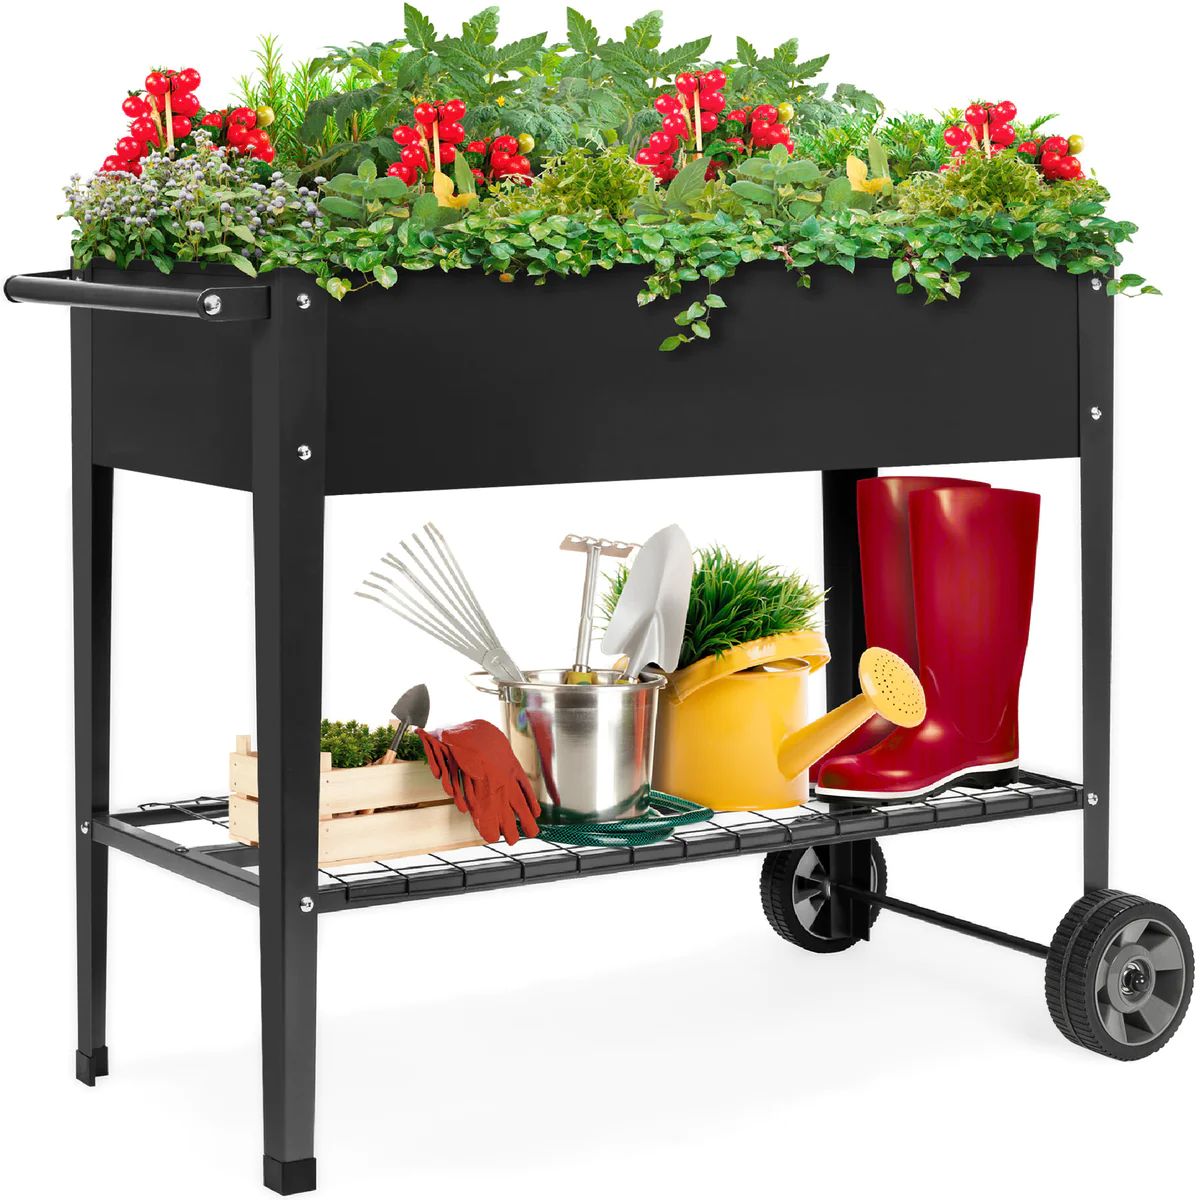 Best Choice Products Elevated Metal Garden Bed for Backyard w/ Wheels, Shelf | Best Choice Products 